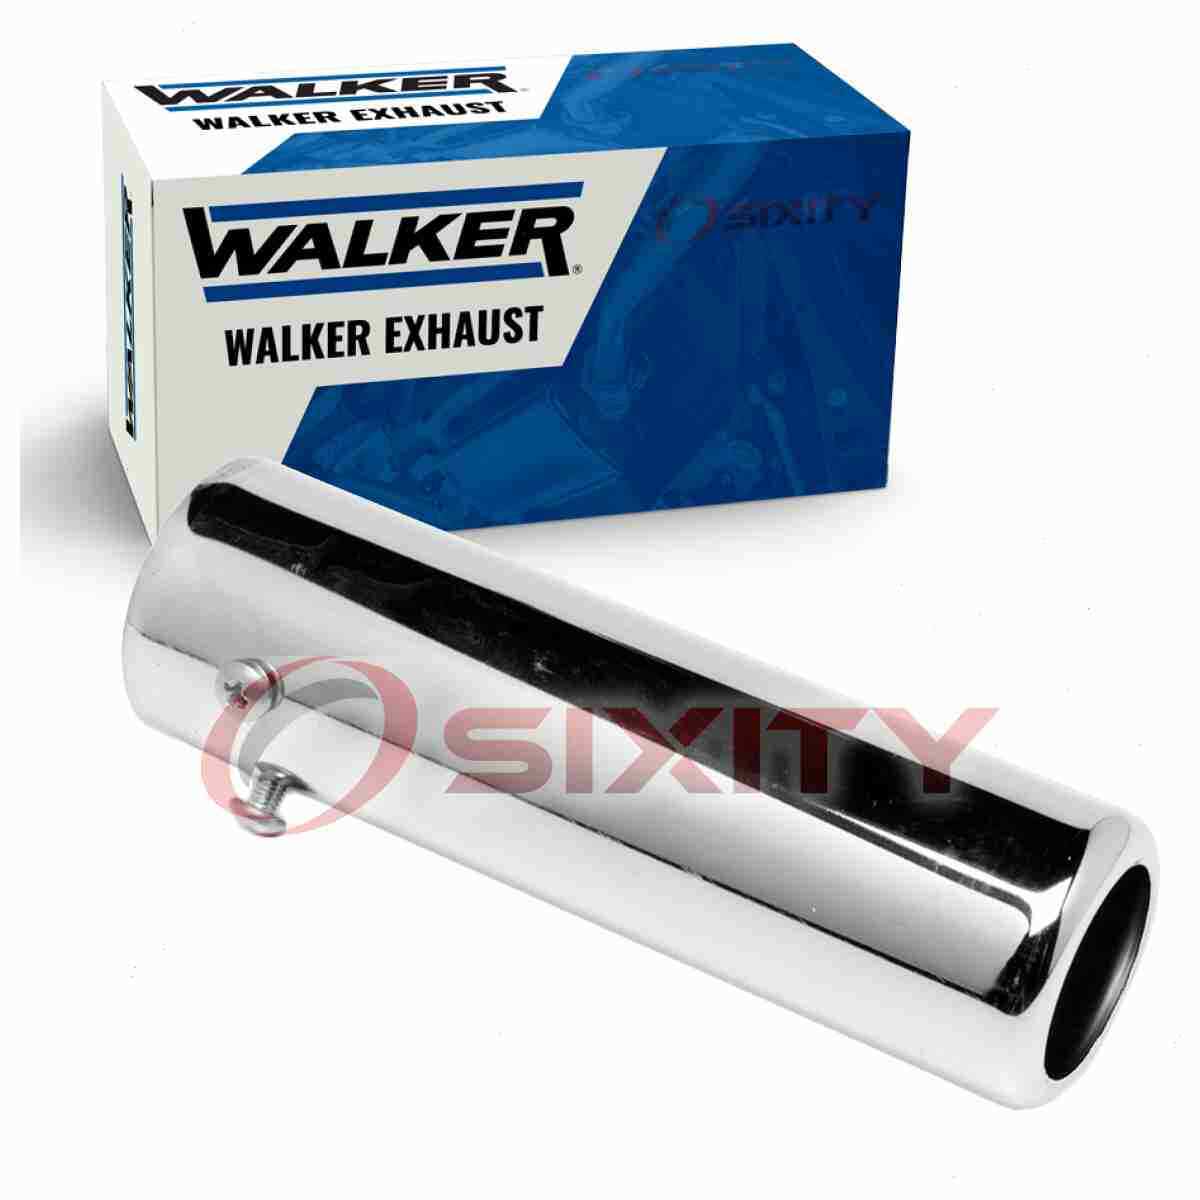 Walker Exhaust Pipe Spout for 1990-1992 Nissan Stanza 2.4L L4 Tail Pipes  su